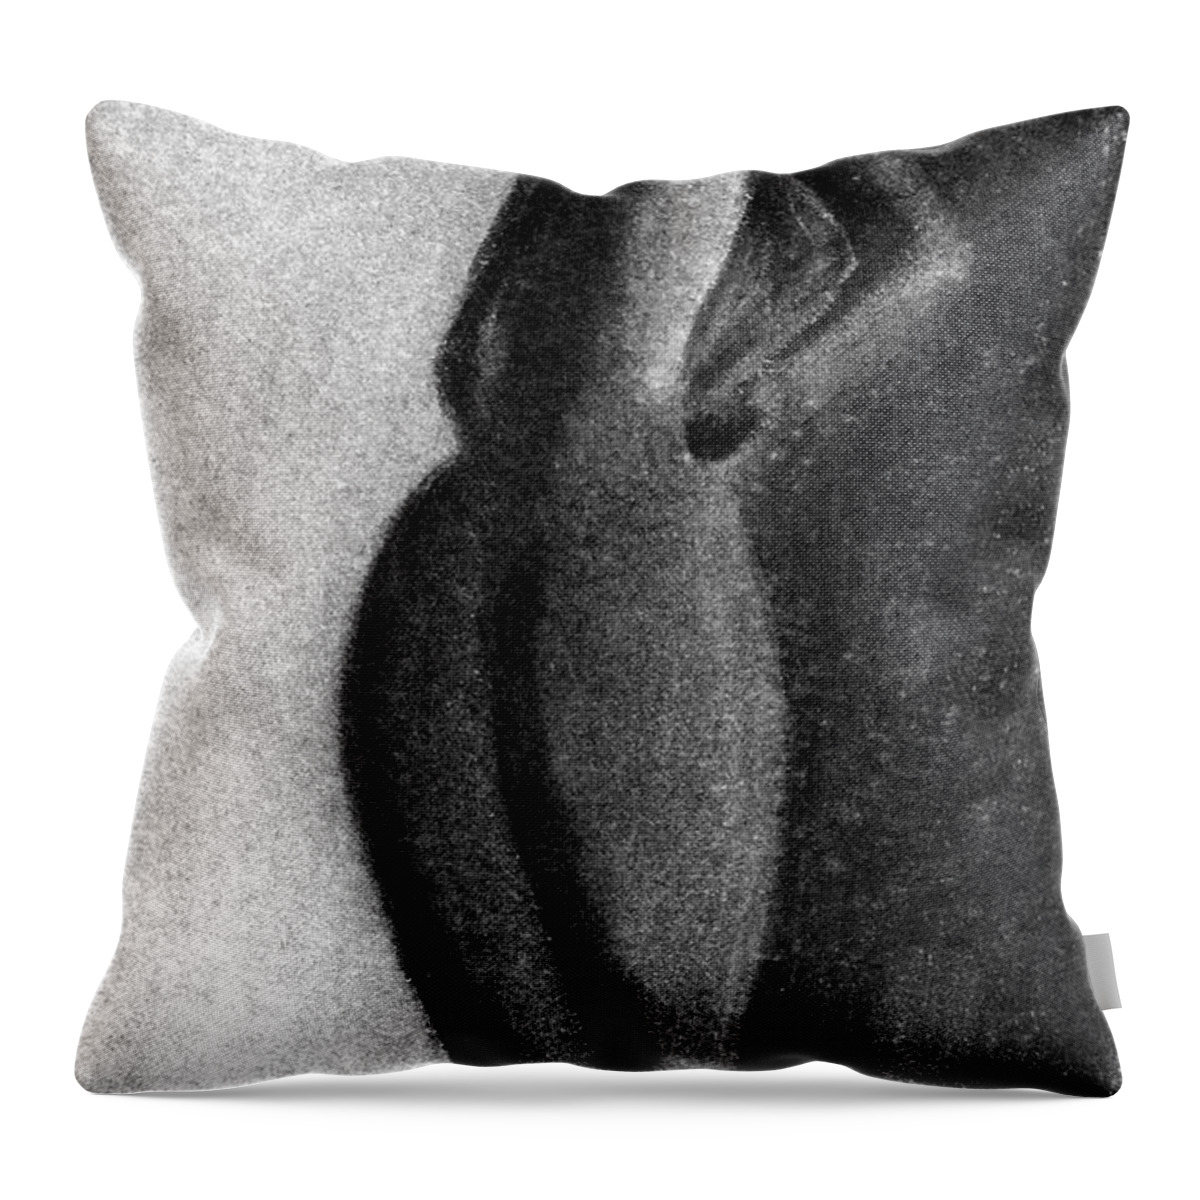  Throw Pillow featuring the drawing . #445 by James Lanigan Thompson MFA